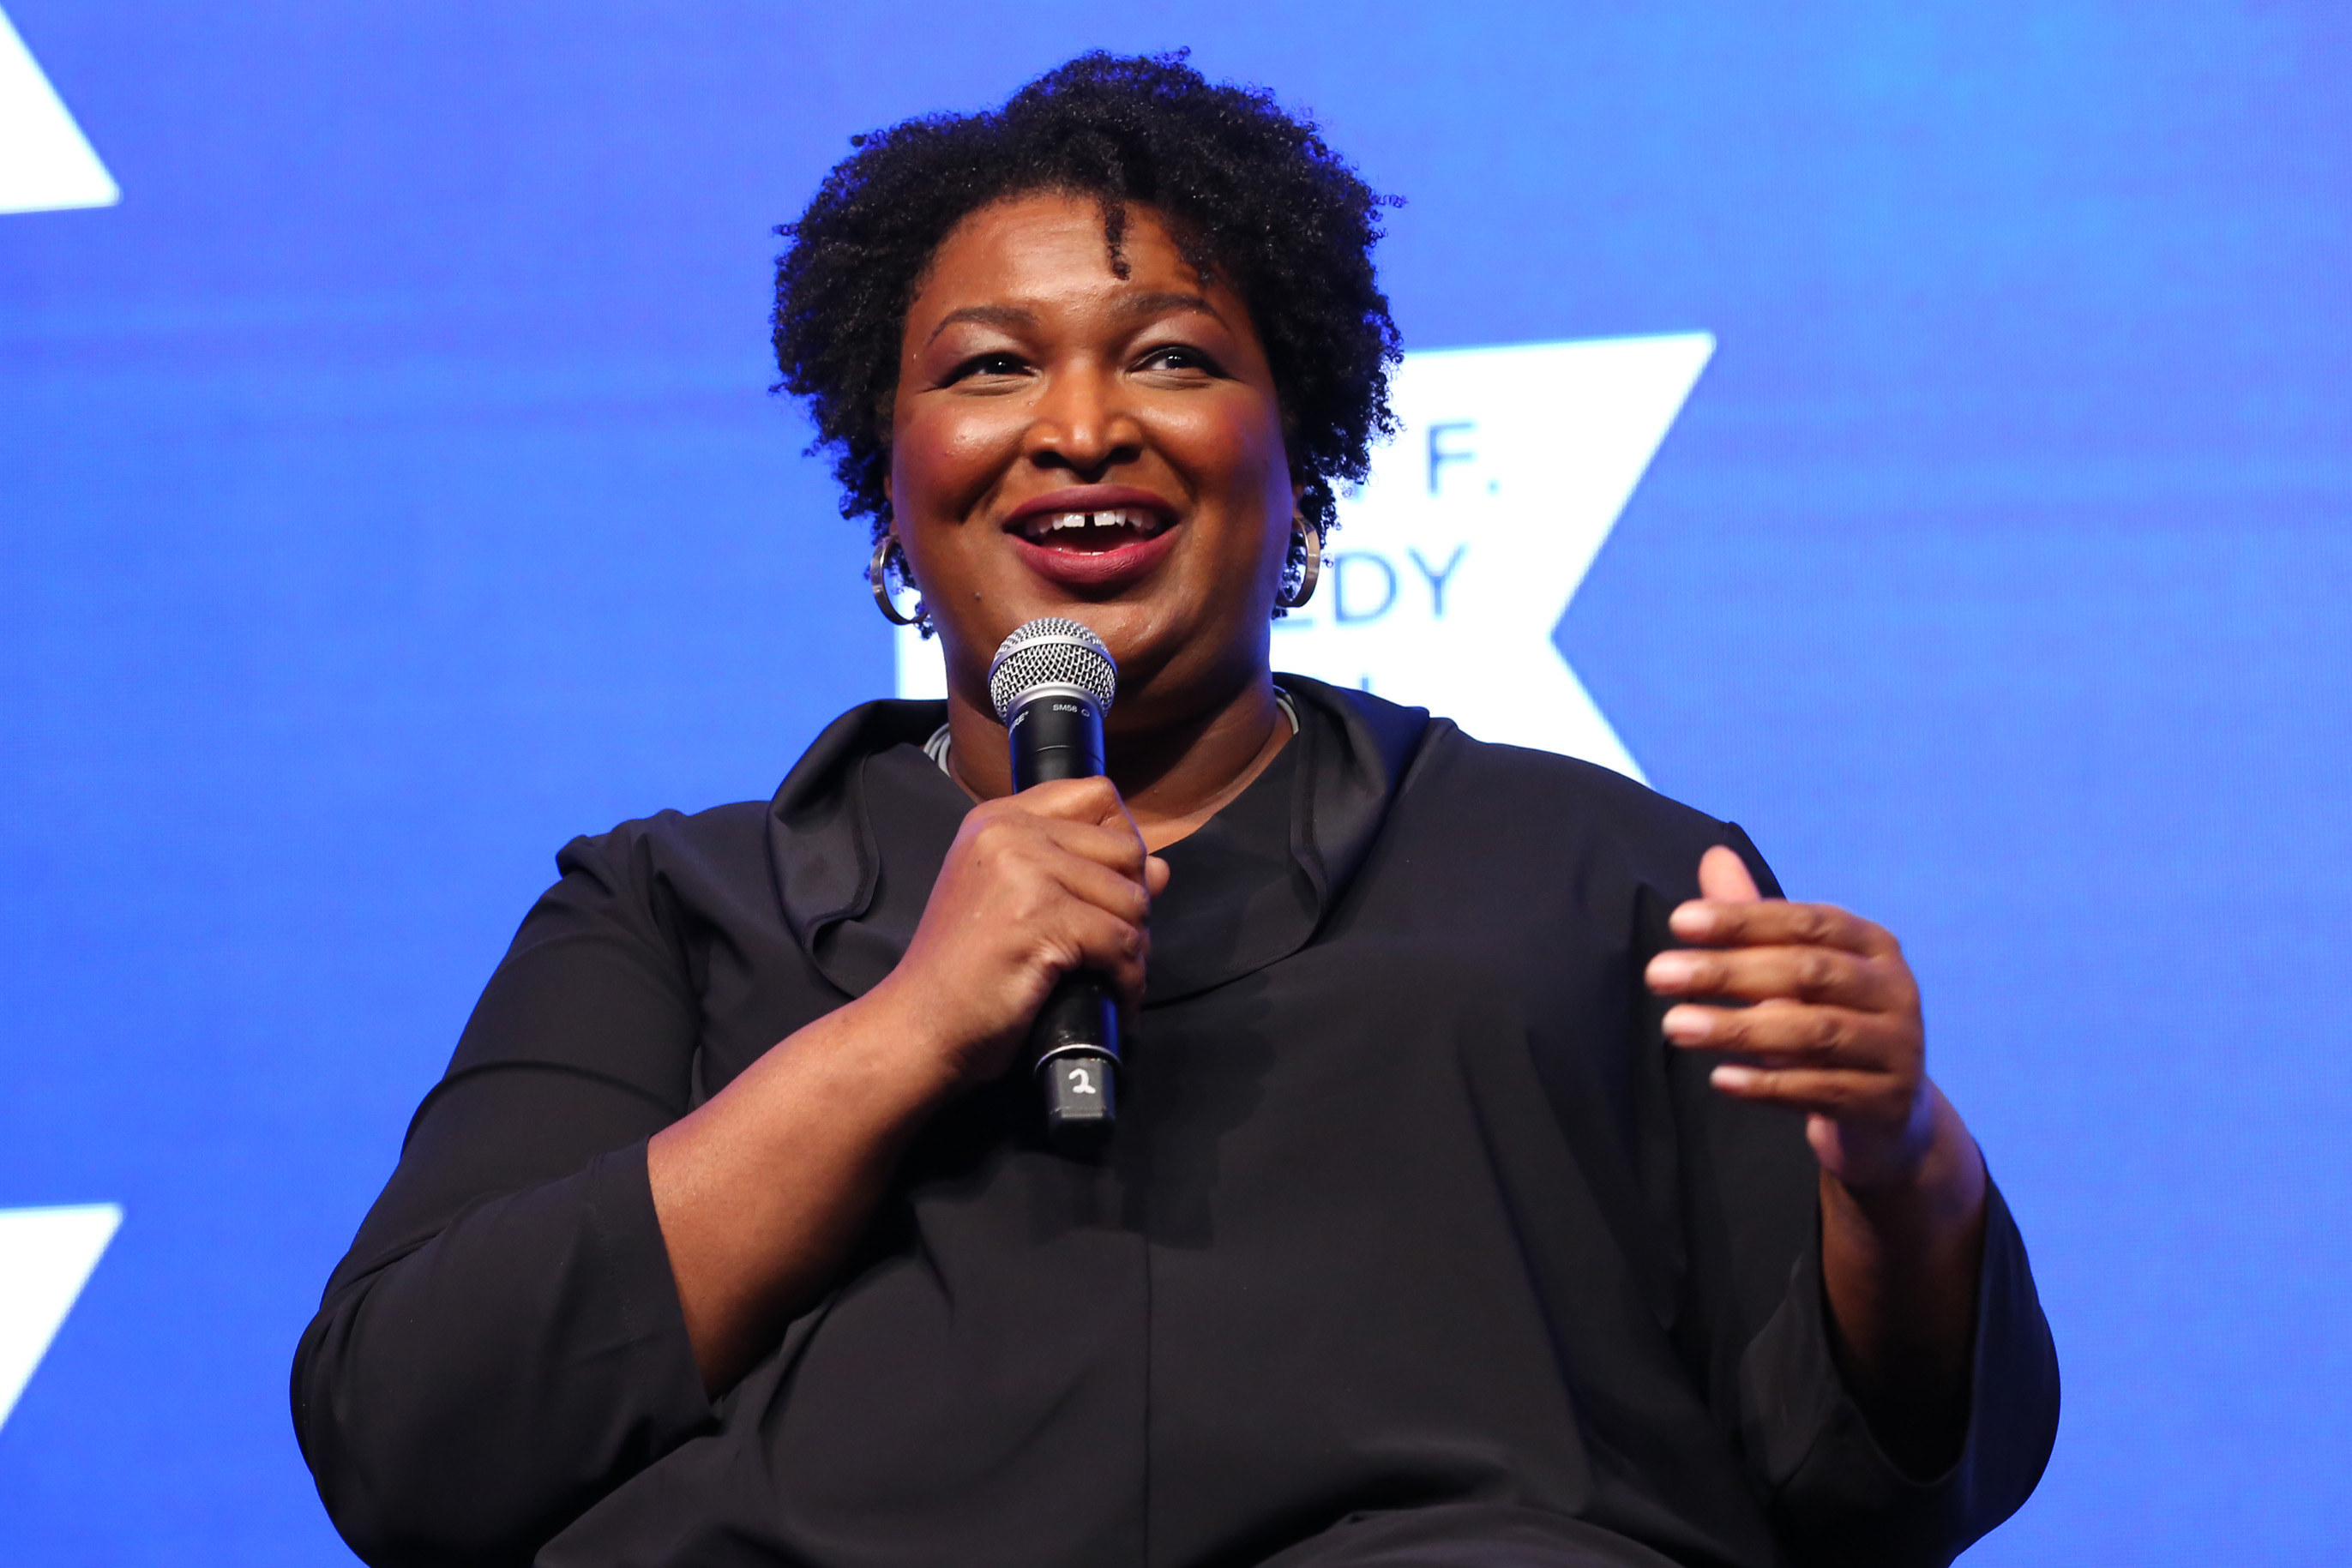 Stacey Abrams speaking onstage